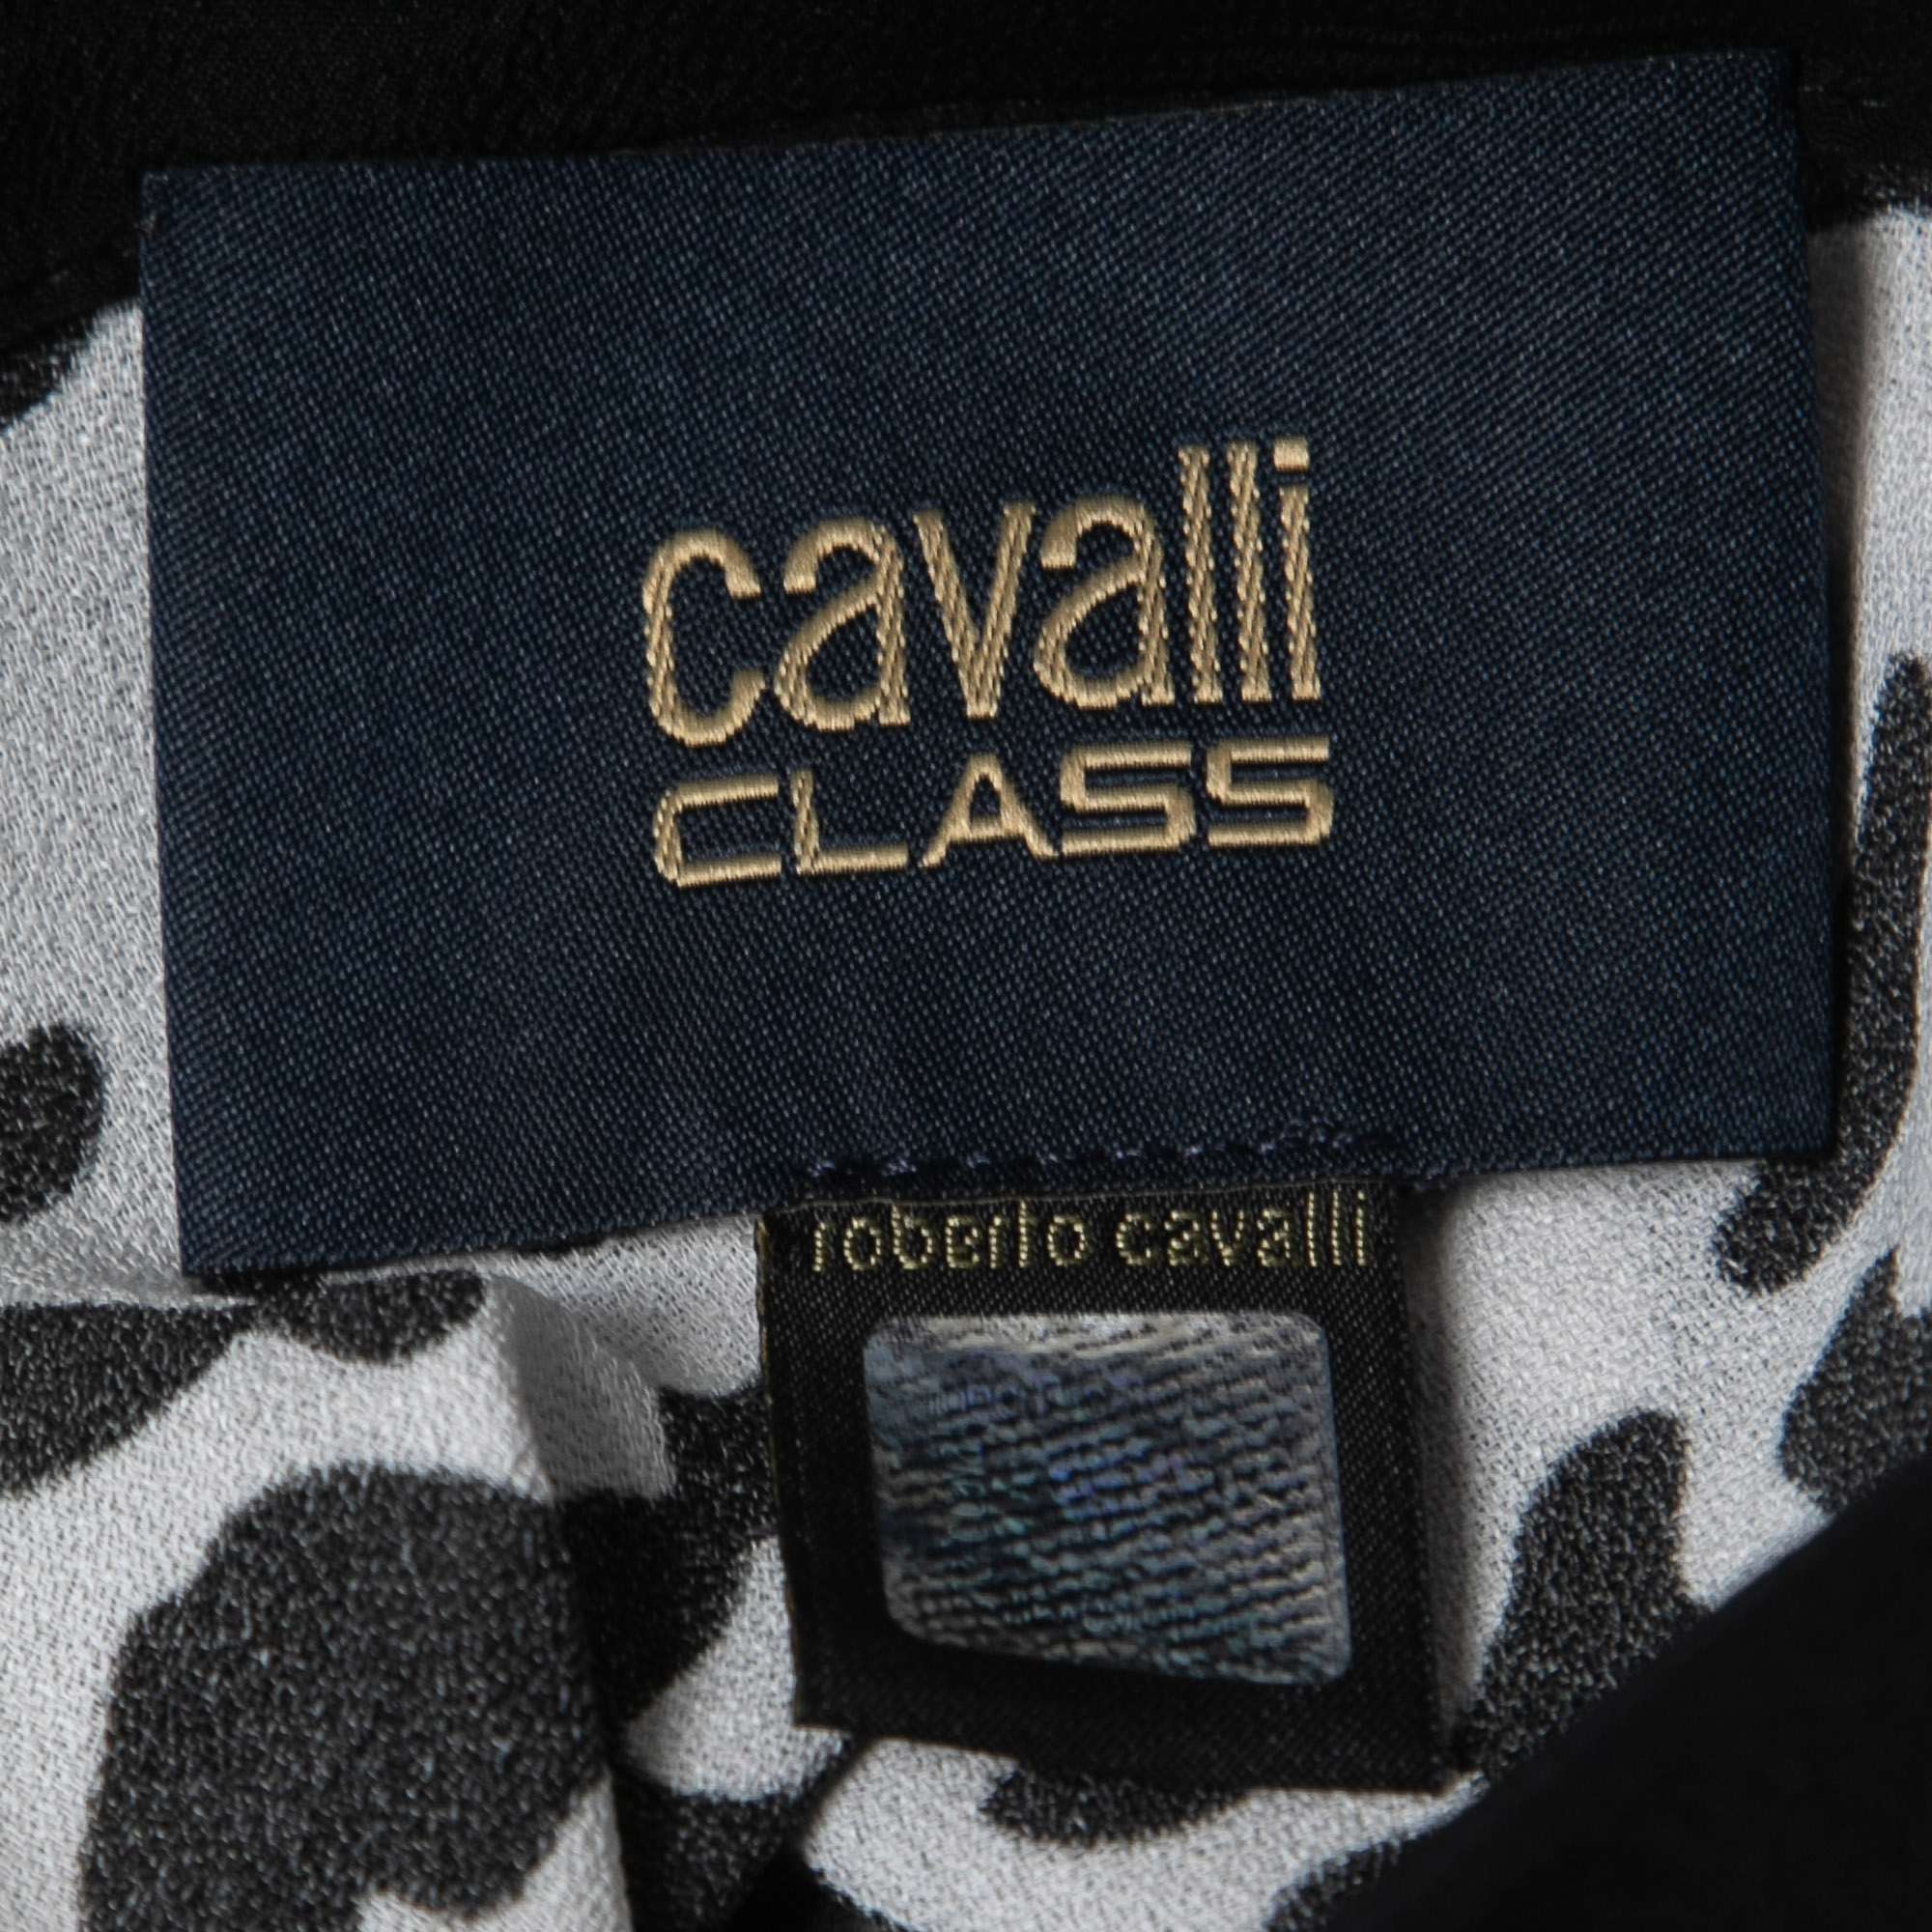 Class By Roberto Cavalli White Animal Print Button Front Shirt Blouse L